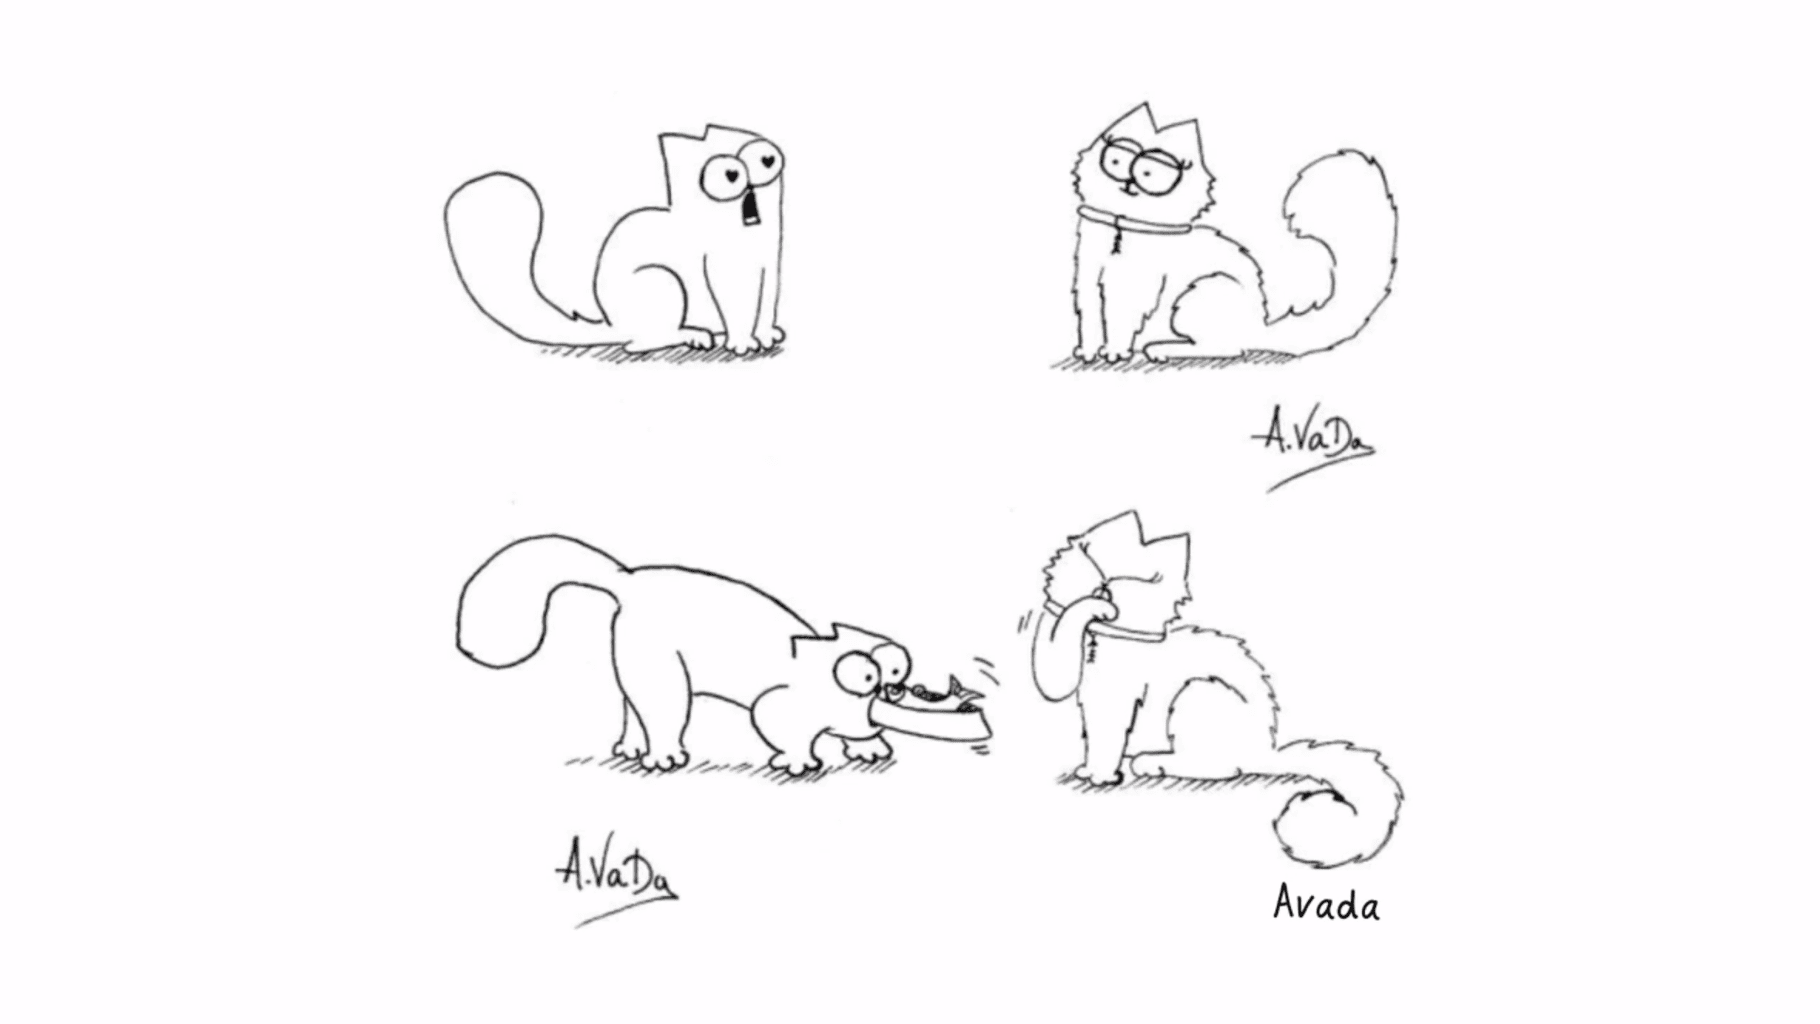 Cat Fans Do: Simon's Cat #1 - Life With Cats